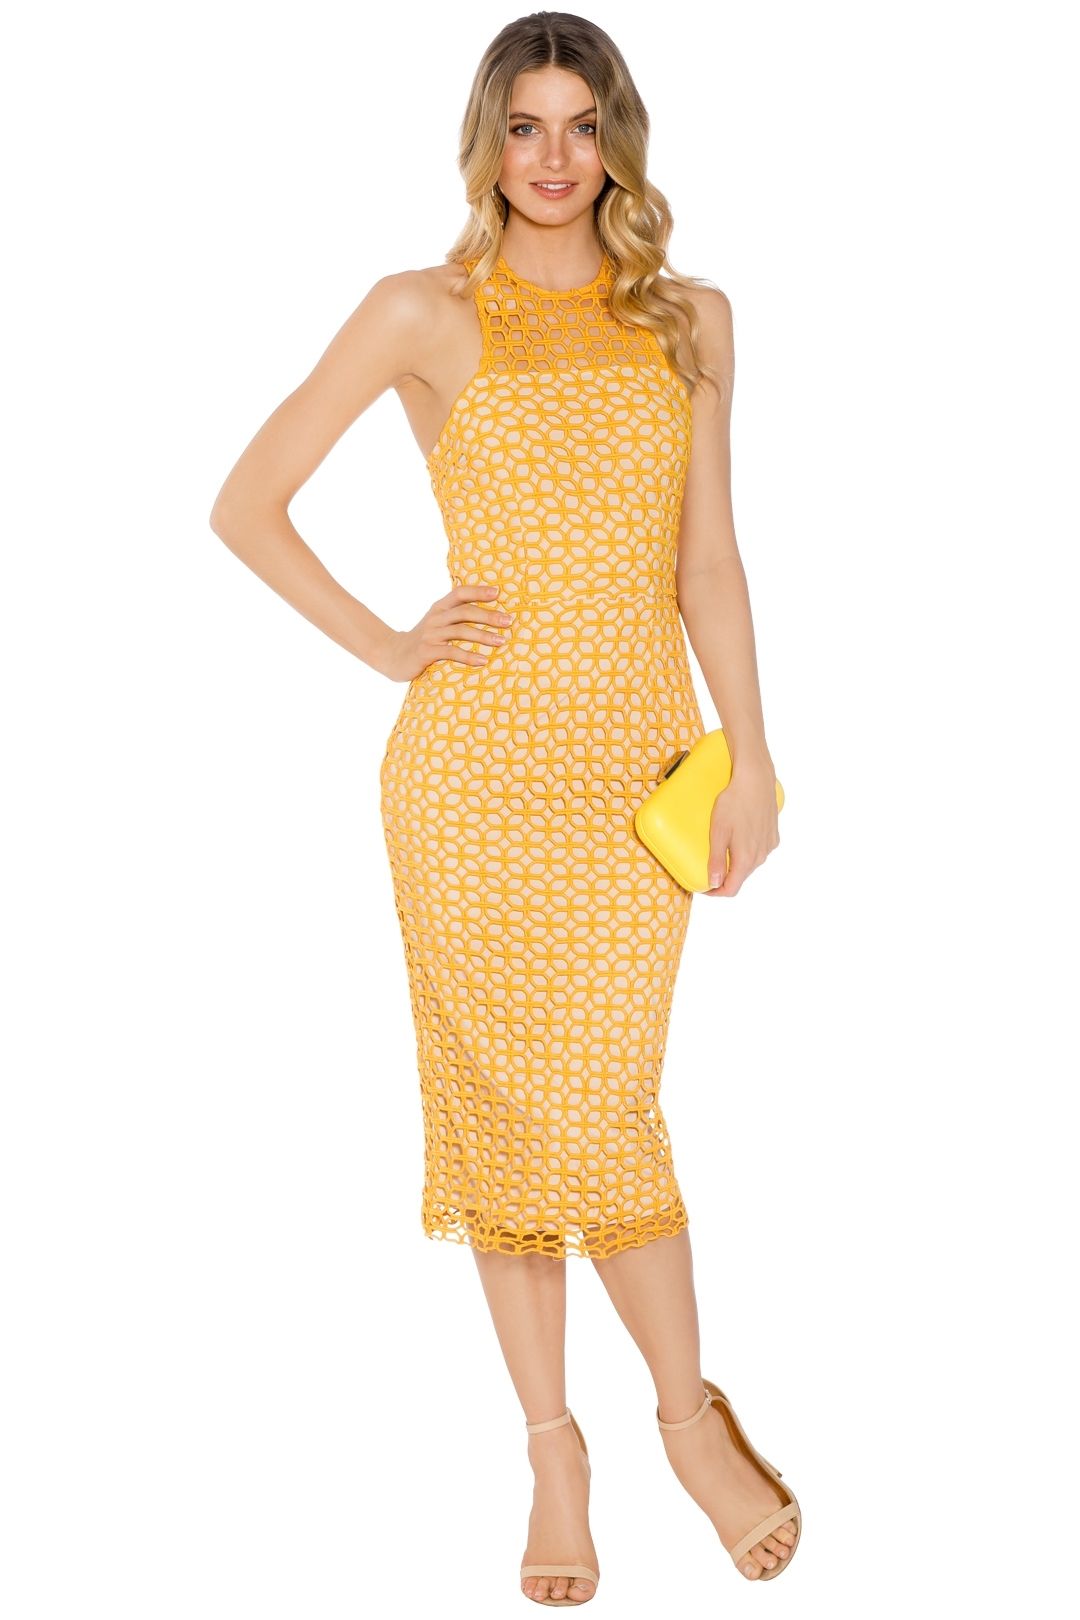 Cooper St - Karlie High Neck Lace Dress - Yellow - Front